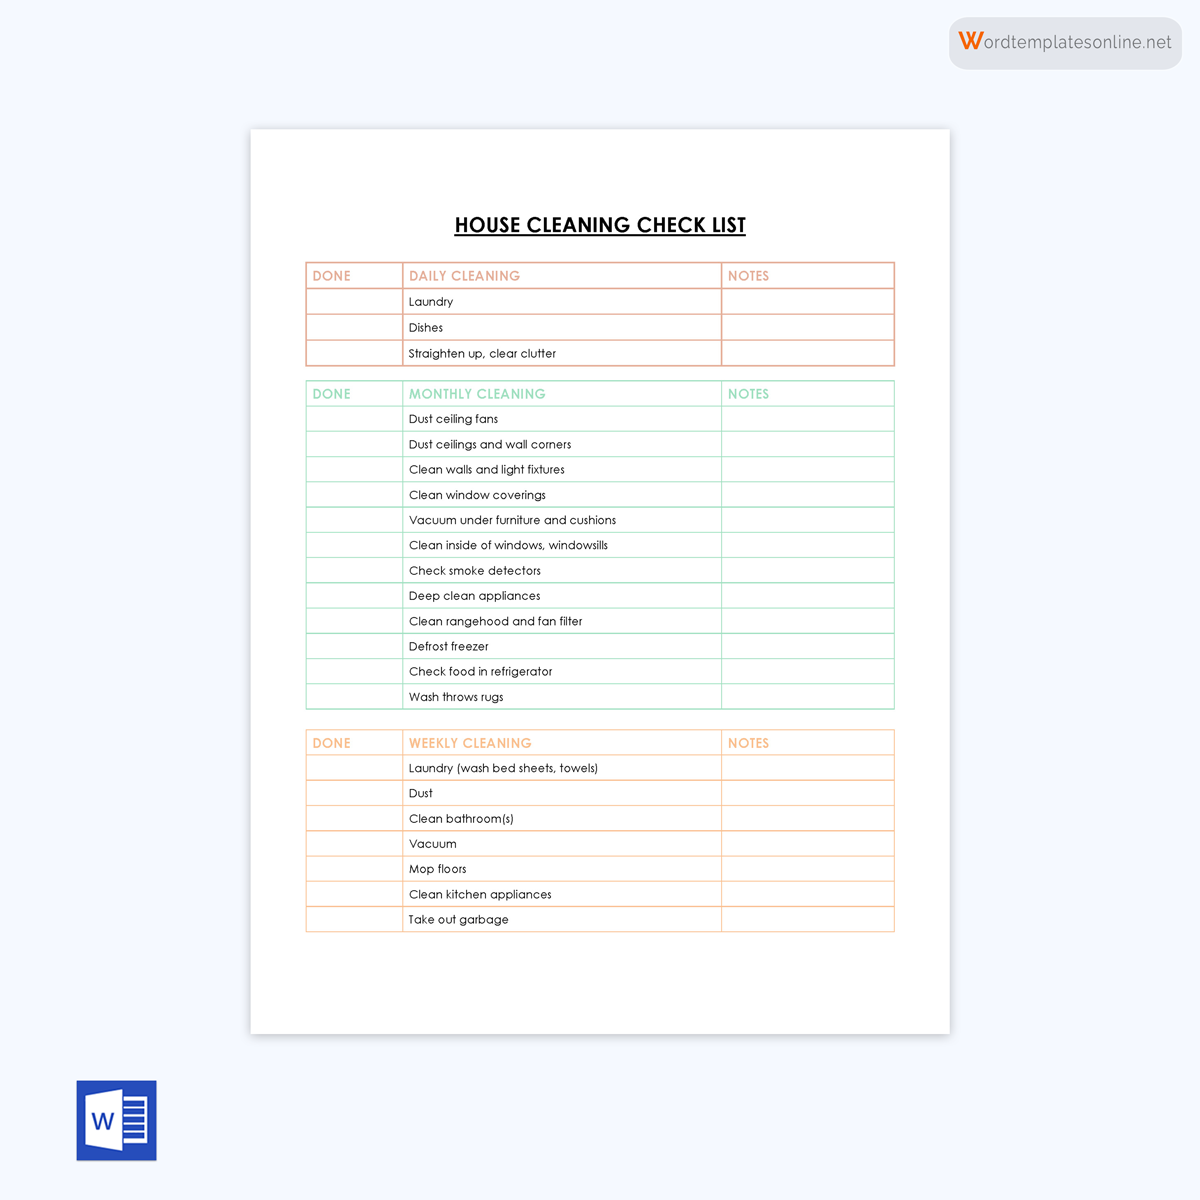 House Cleaning Checklist Template - Printable Example